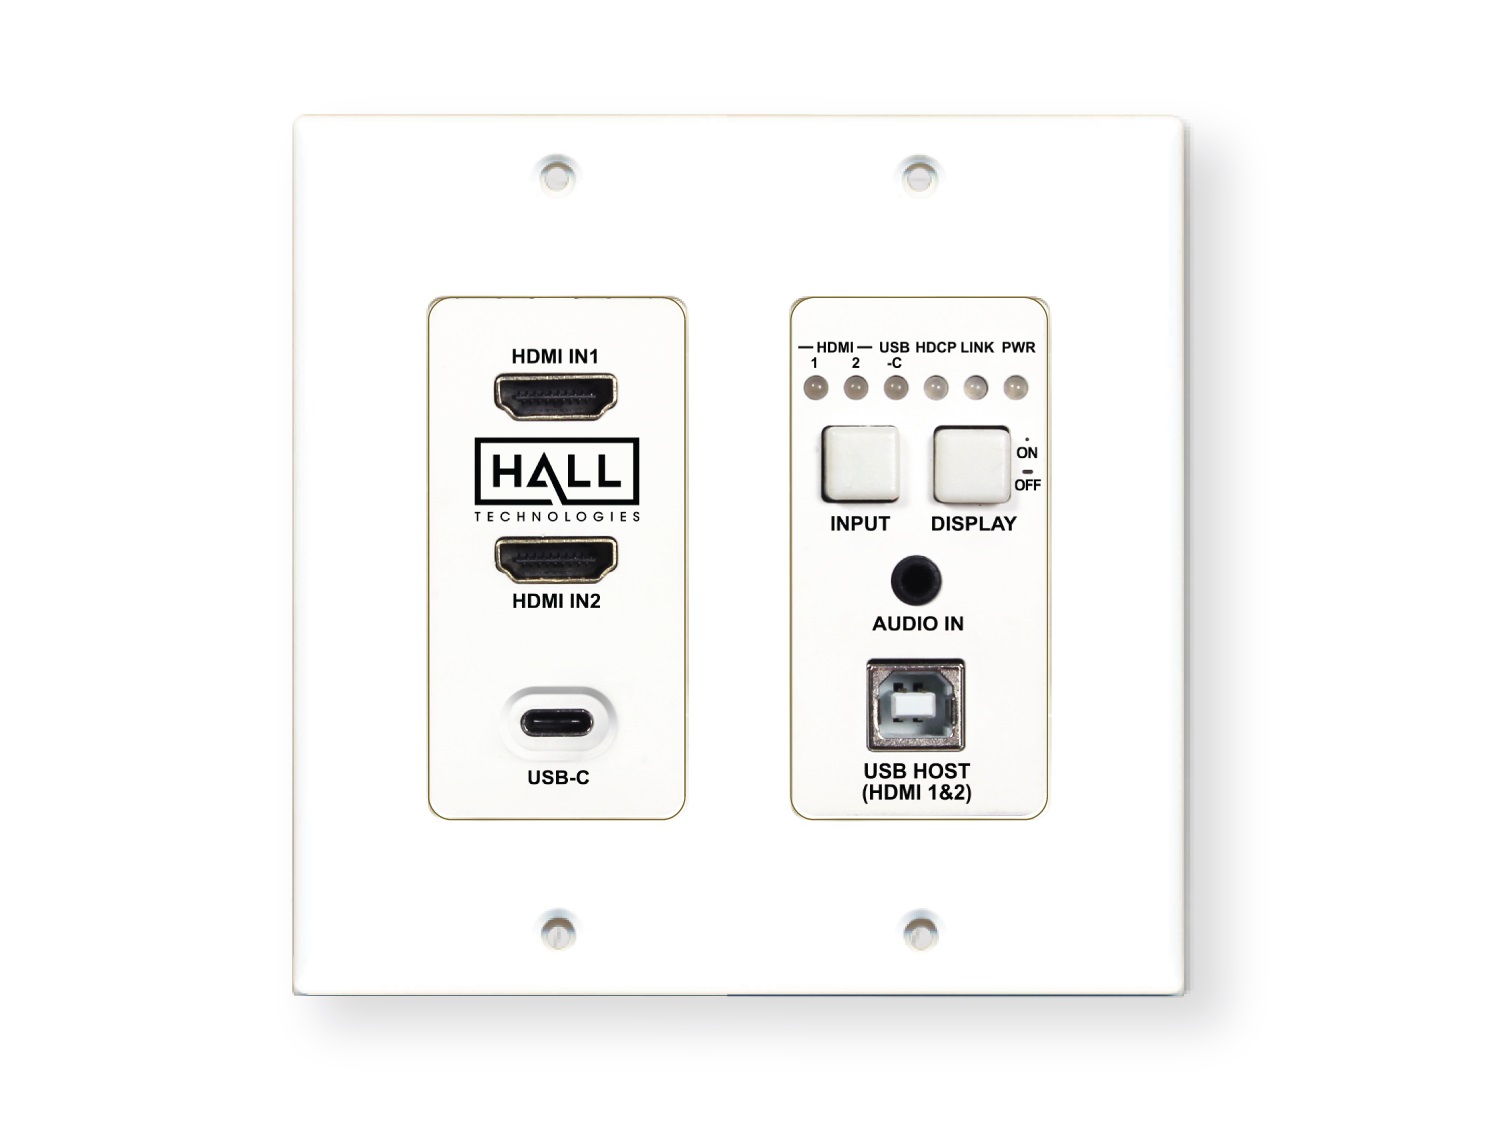 HT-DSCV2-70-TX-US 4K UHD In-Wall Transmitter with USB Host and CEC Triggering by Hall Technologies